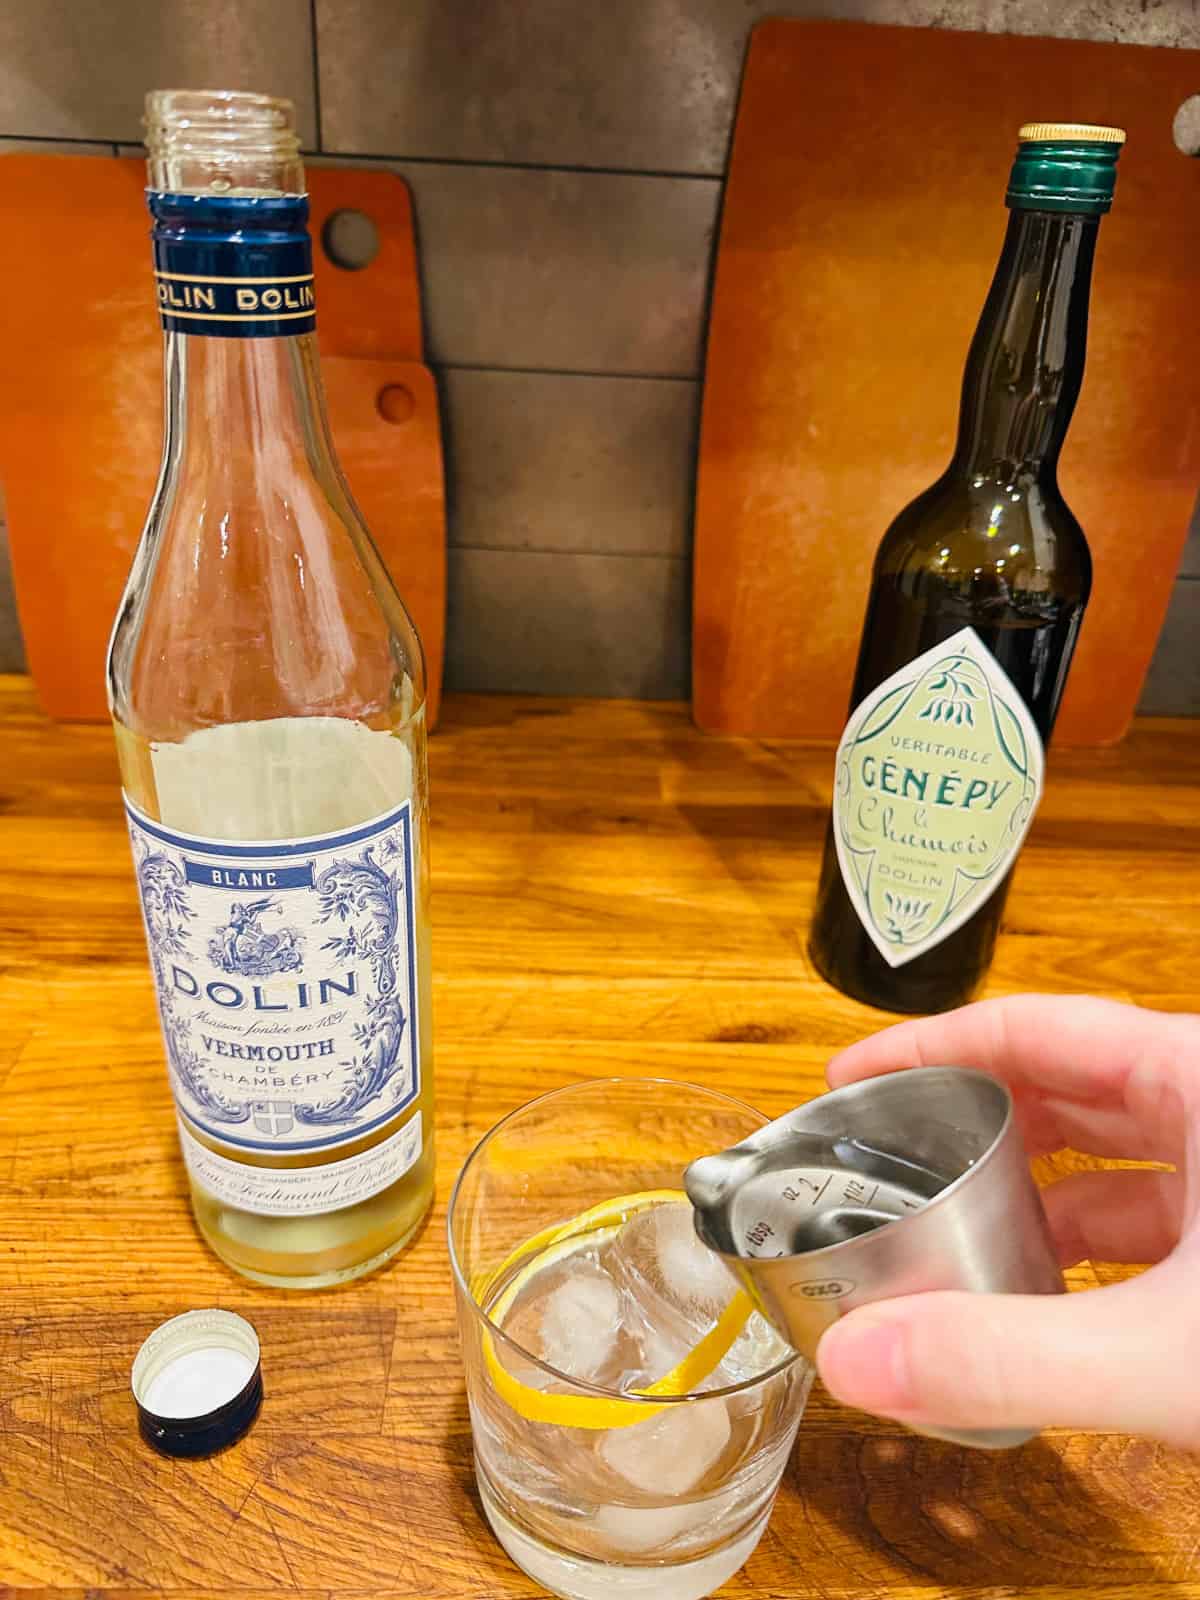 Hand pouring clear liquid from a steel measuring jigger into an old fashioned glass next to a bottle of Blanc vermouth.